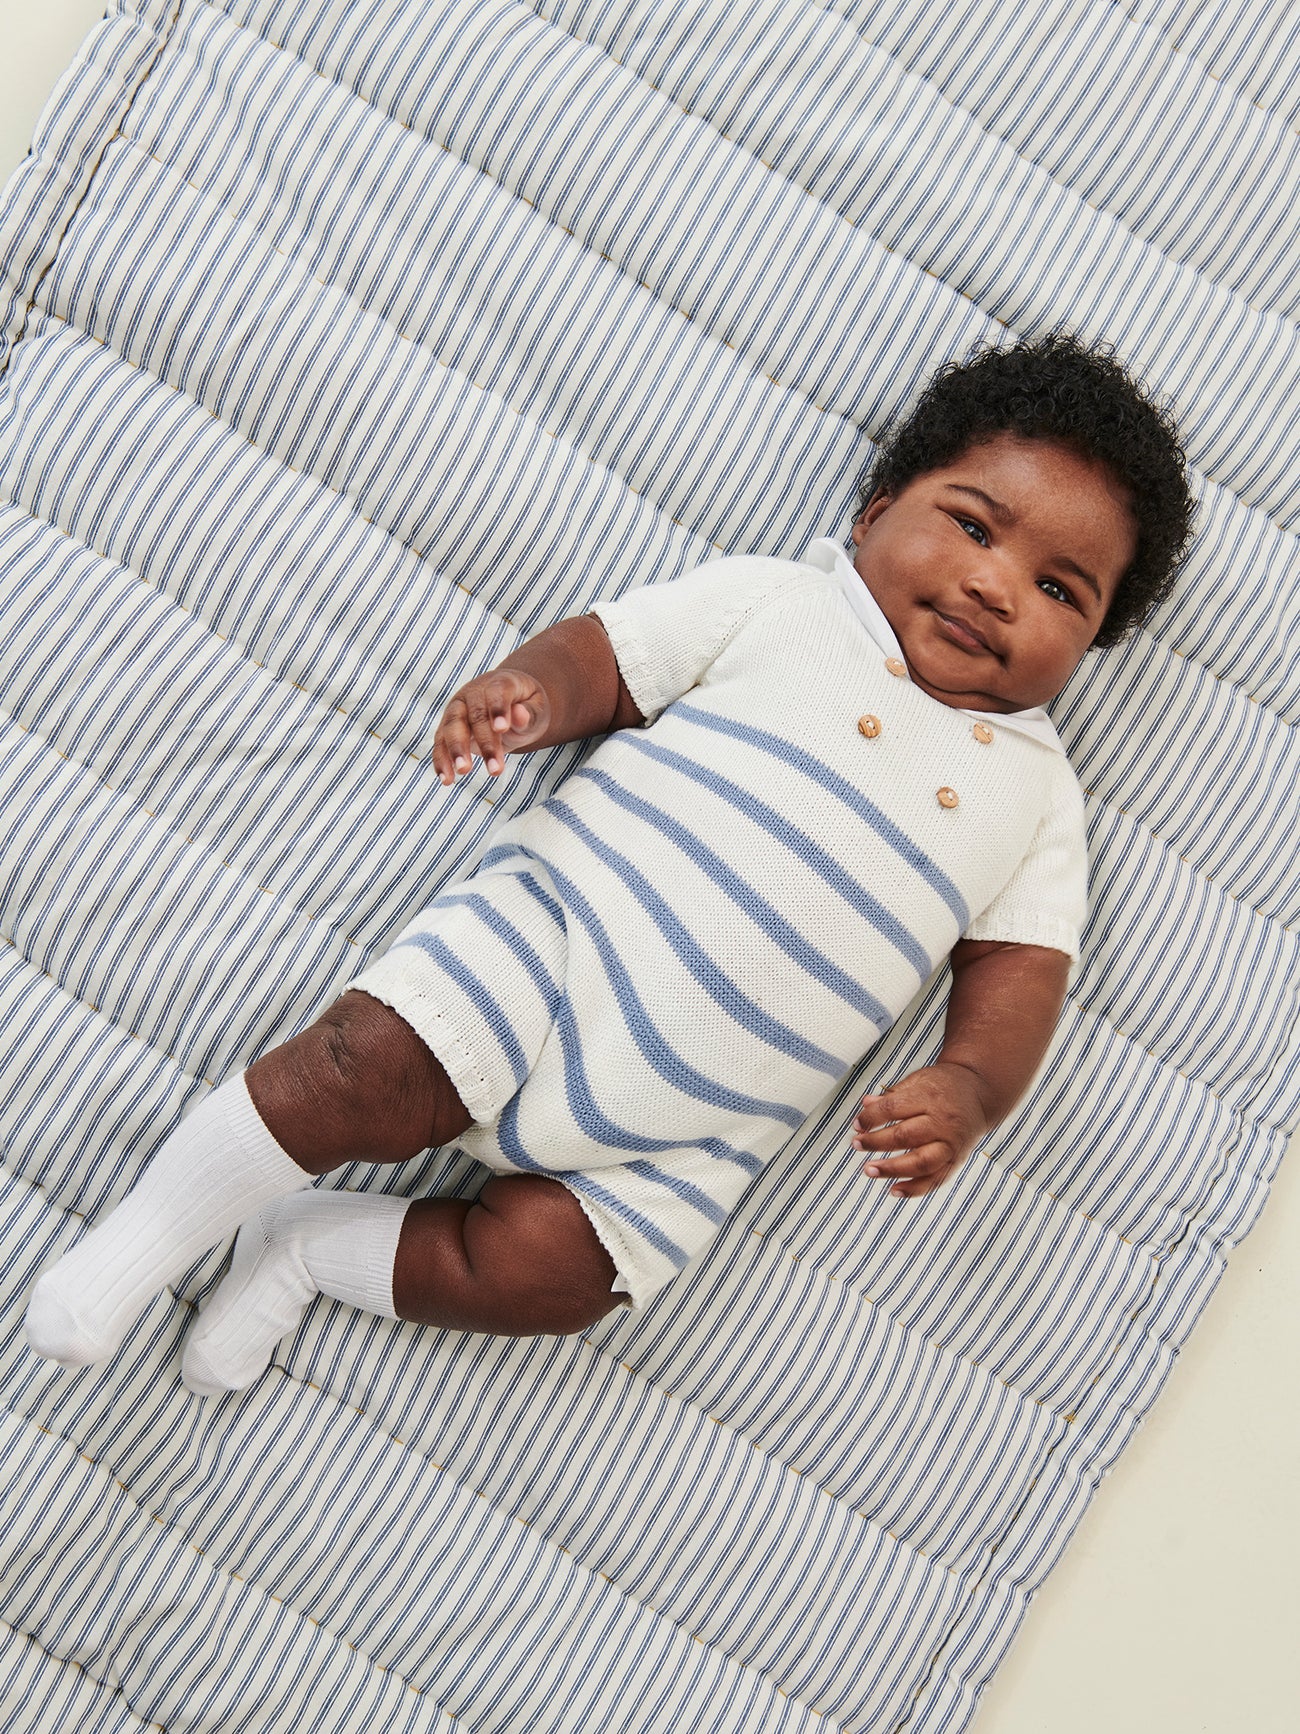 Dusty Blue Stripe Clavel Cotton Baby Knitted Playsuit